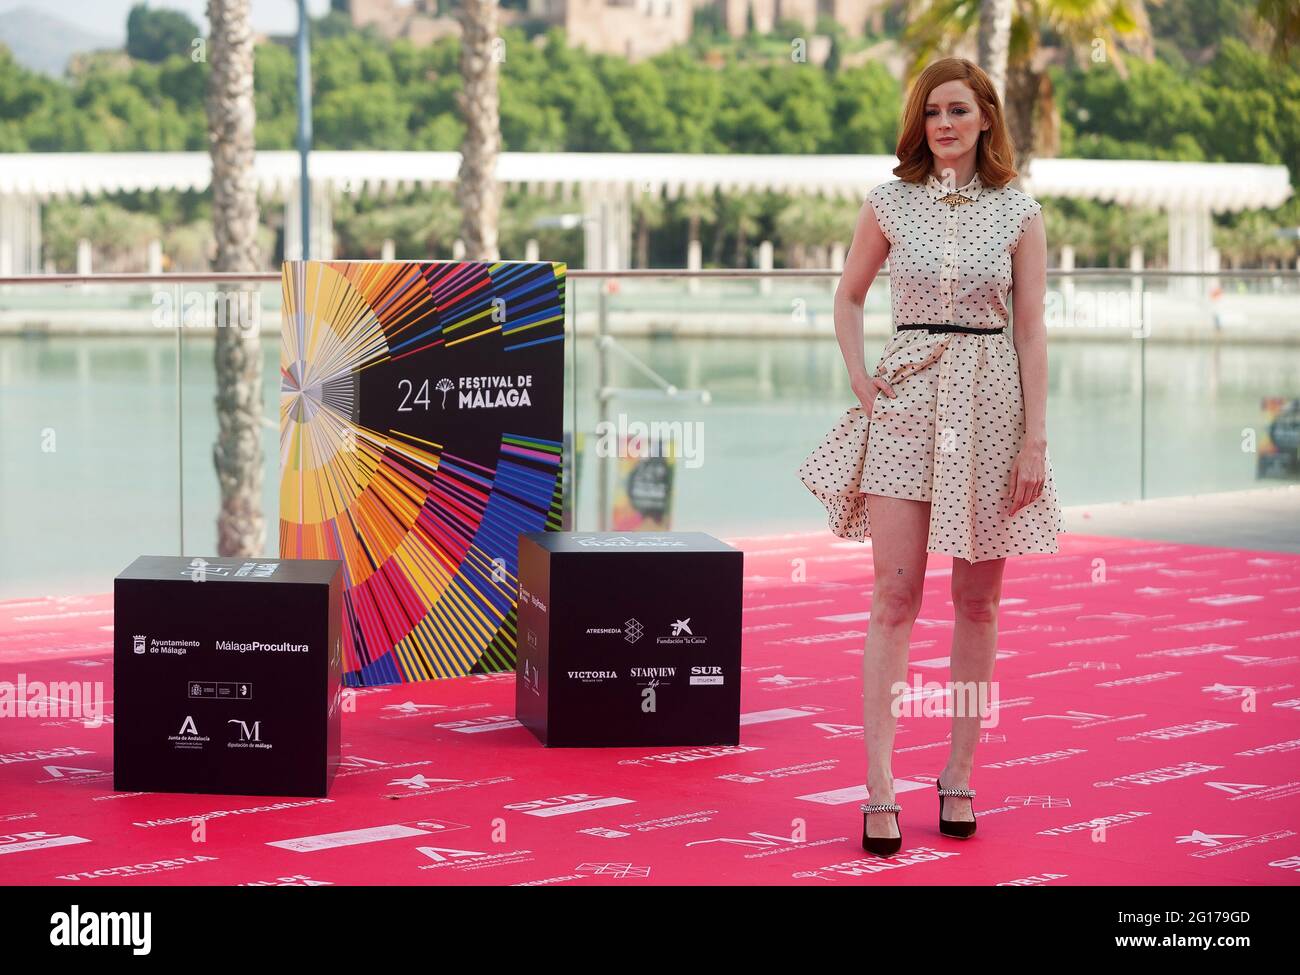 Malaga, Spain. 05th June, 2021. Spanish actress Ana Maria Polvorosa attends the photocall of the film 'Con quien viajas'. The new edition of the 24th Malaga Spanish Film Festival, great cinematographic event in Spain, present the films candidates to win the 'Biznaga de Oro' prize, following all measures to prevent the spread of coronavirus and to guarantee a secure event. The festival will be held from 3 to 13 June. Credit: SOPA Images Limited/Alamy Live News Stock Photo